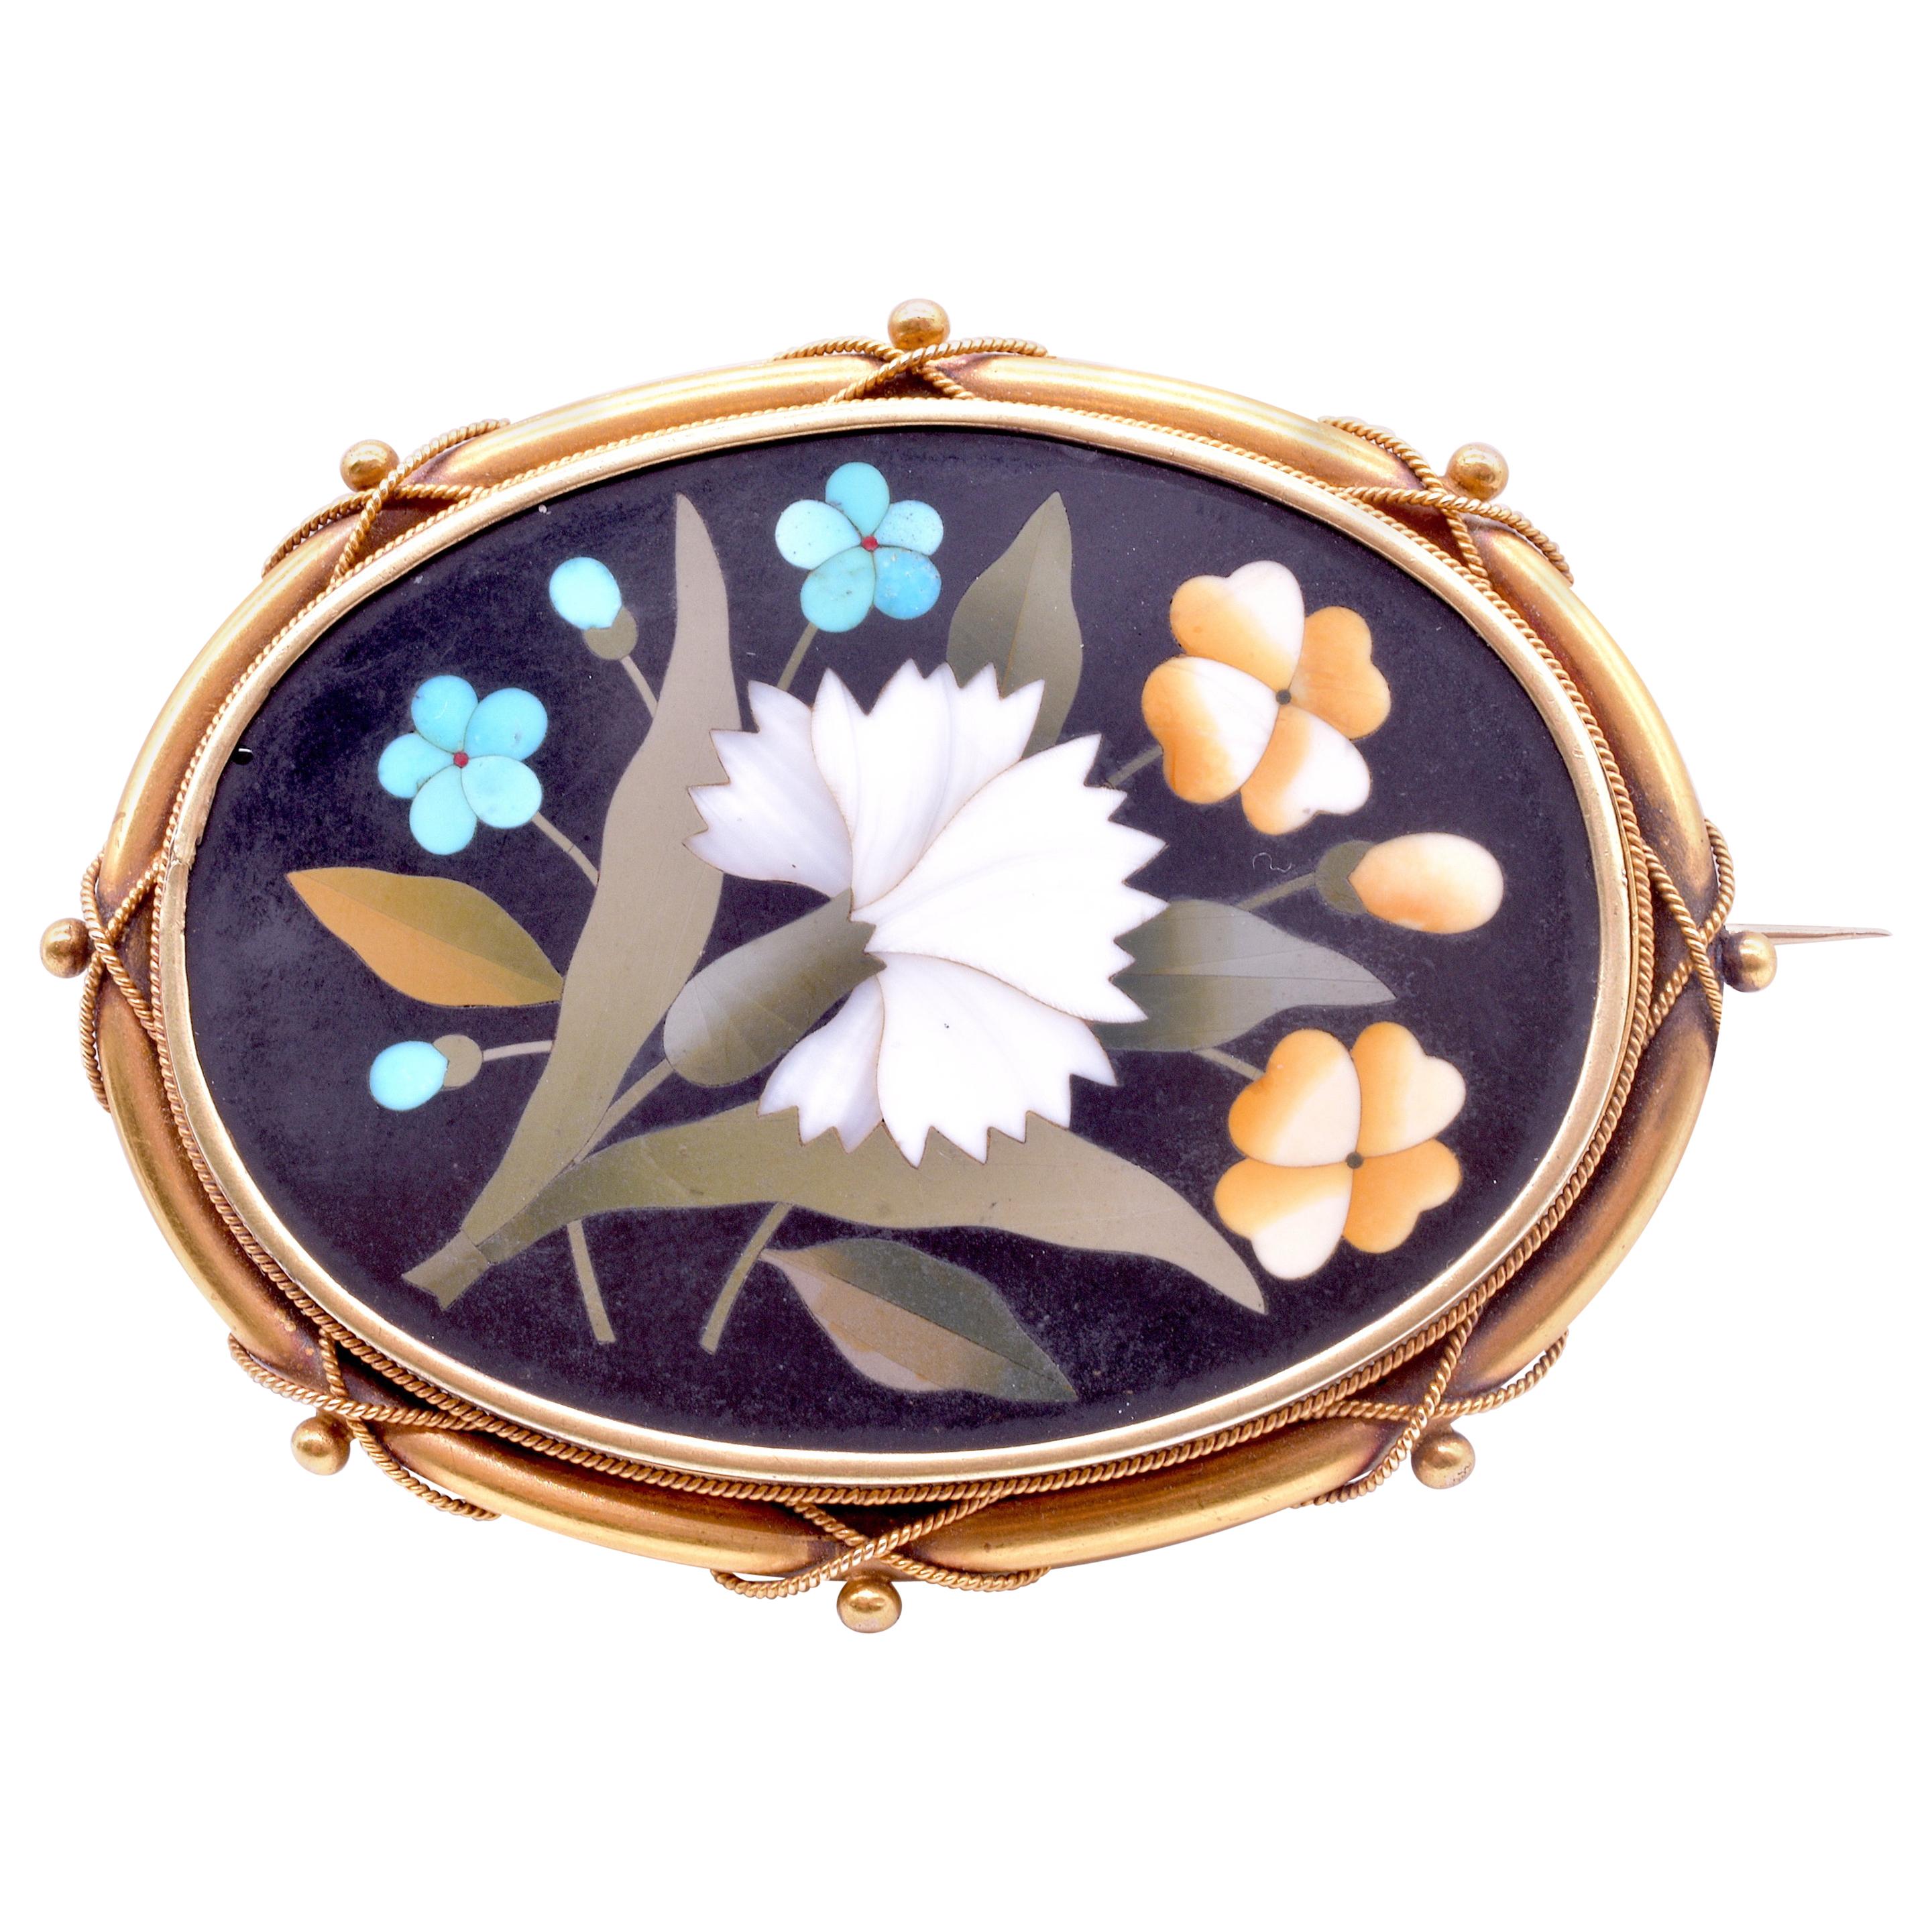 Antique 18 Carat Pietra-Dura Oval Flower Brooch with Gold Mount, c1860